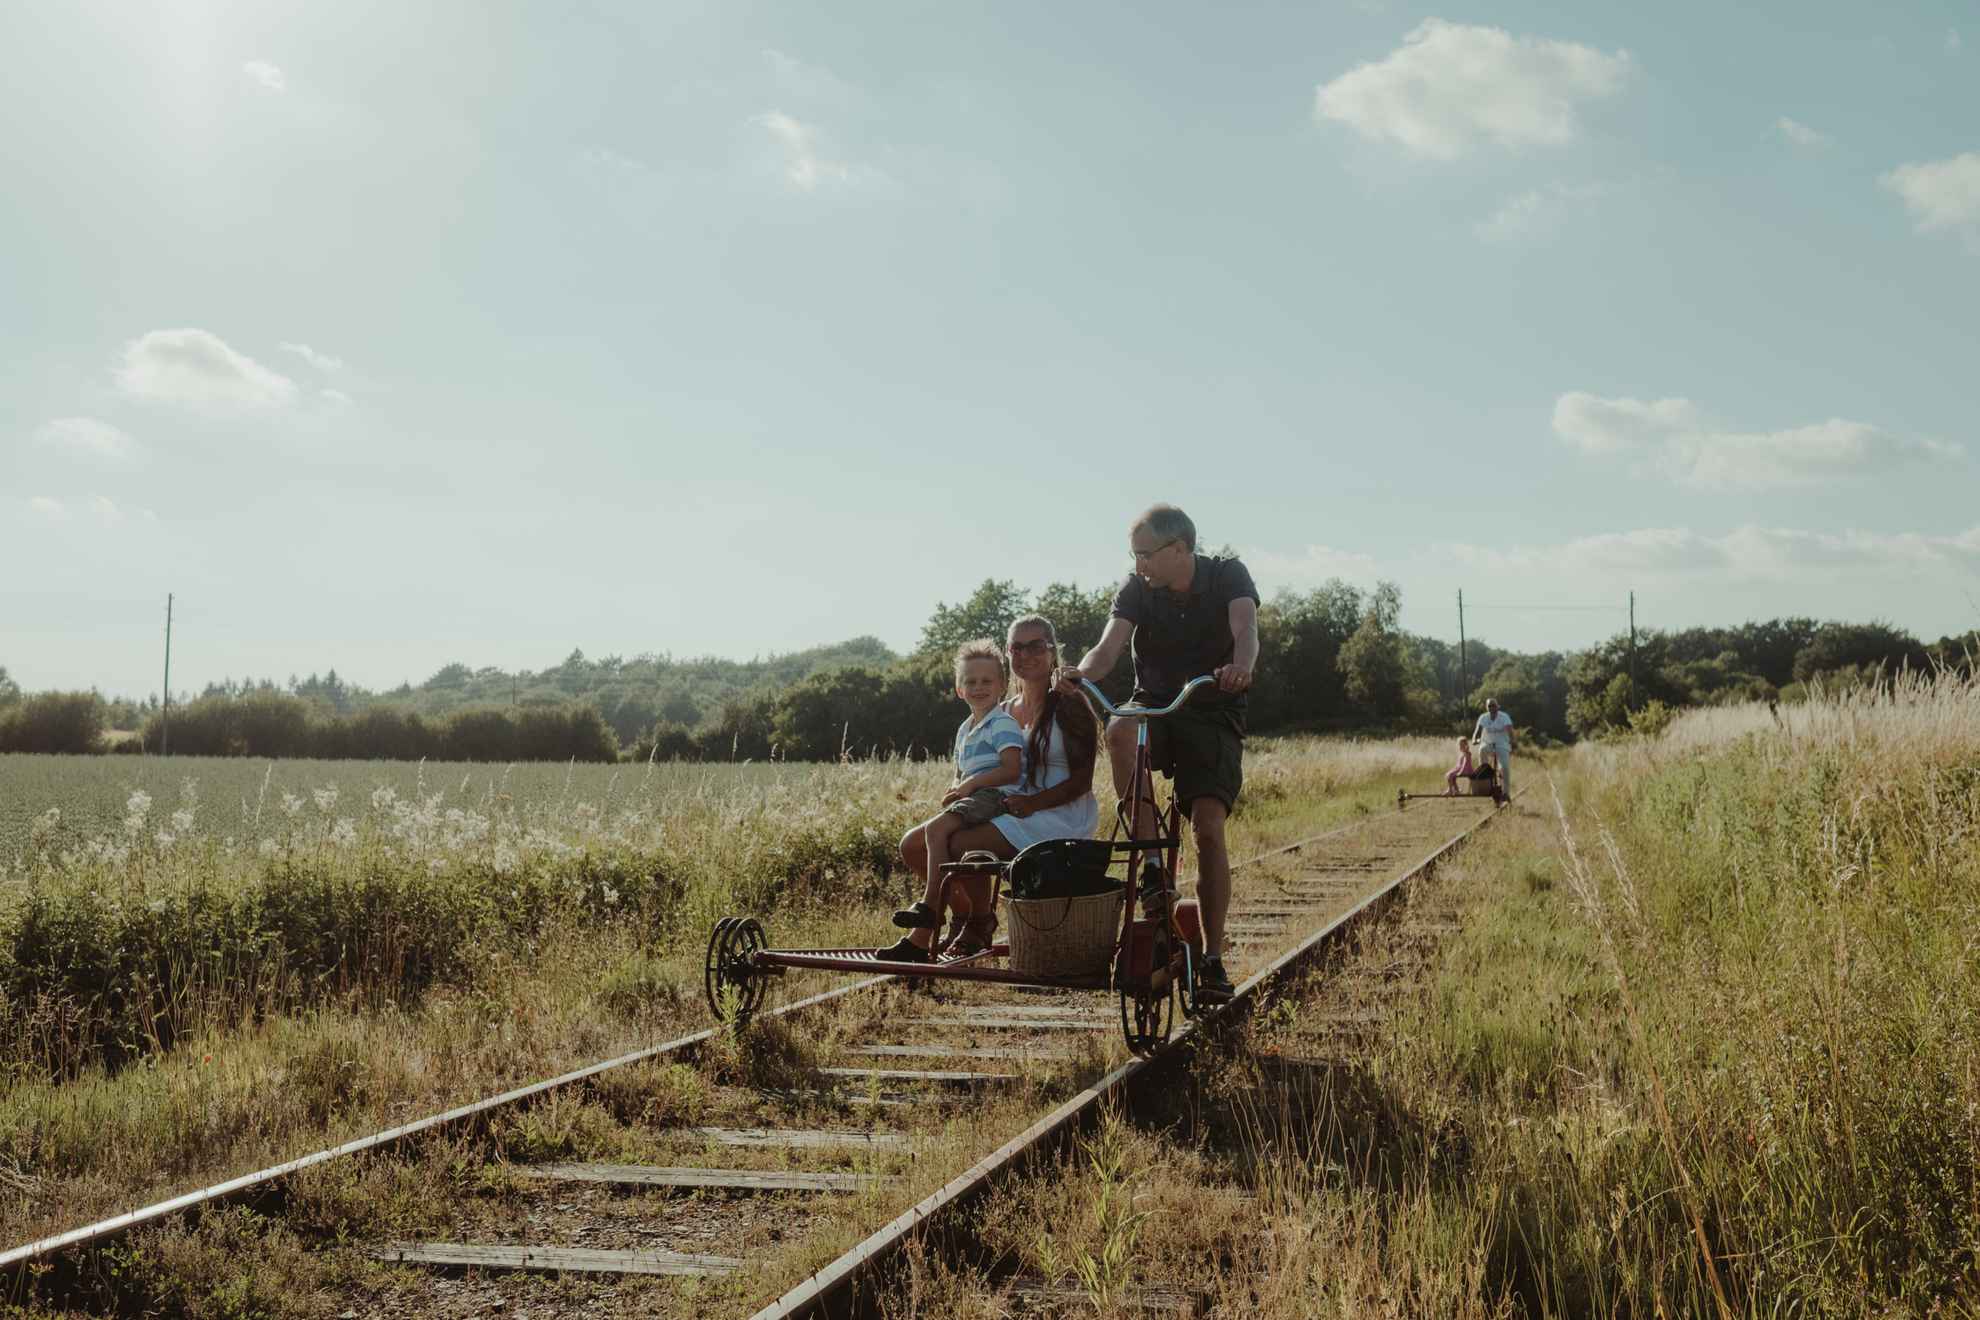 A family on a trolley bike on an old railway, surrounded by fields.